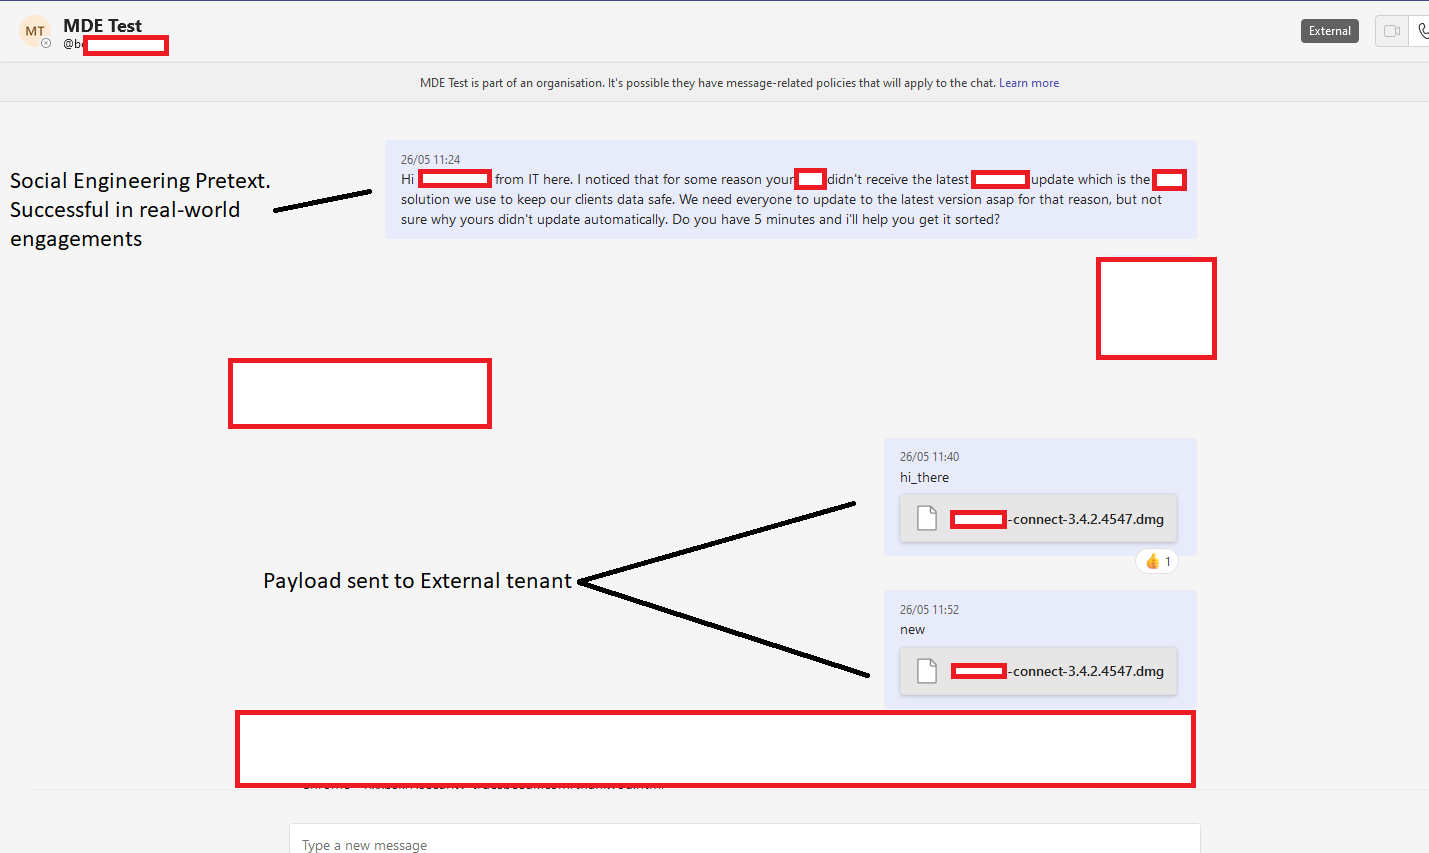 Example of an attack with the sender impersonating a member of the IT team